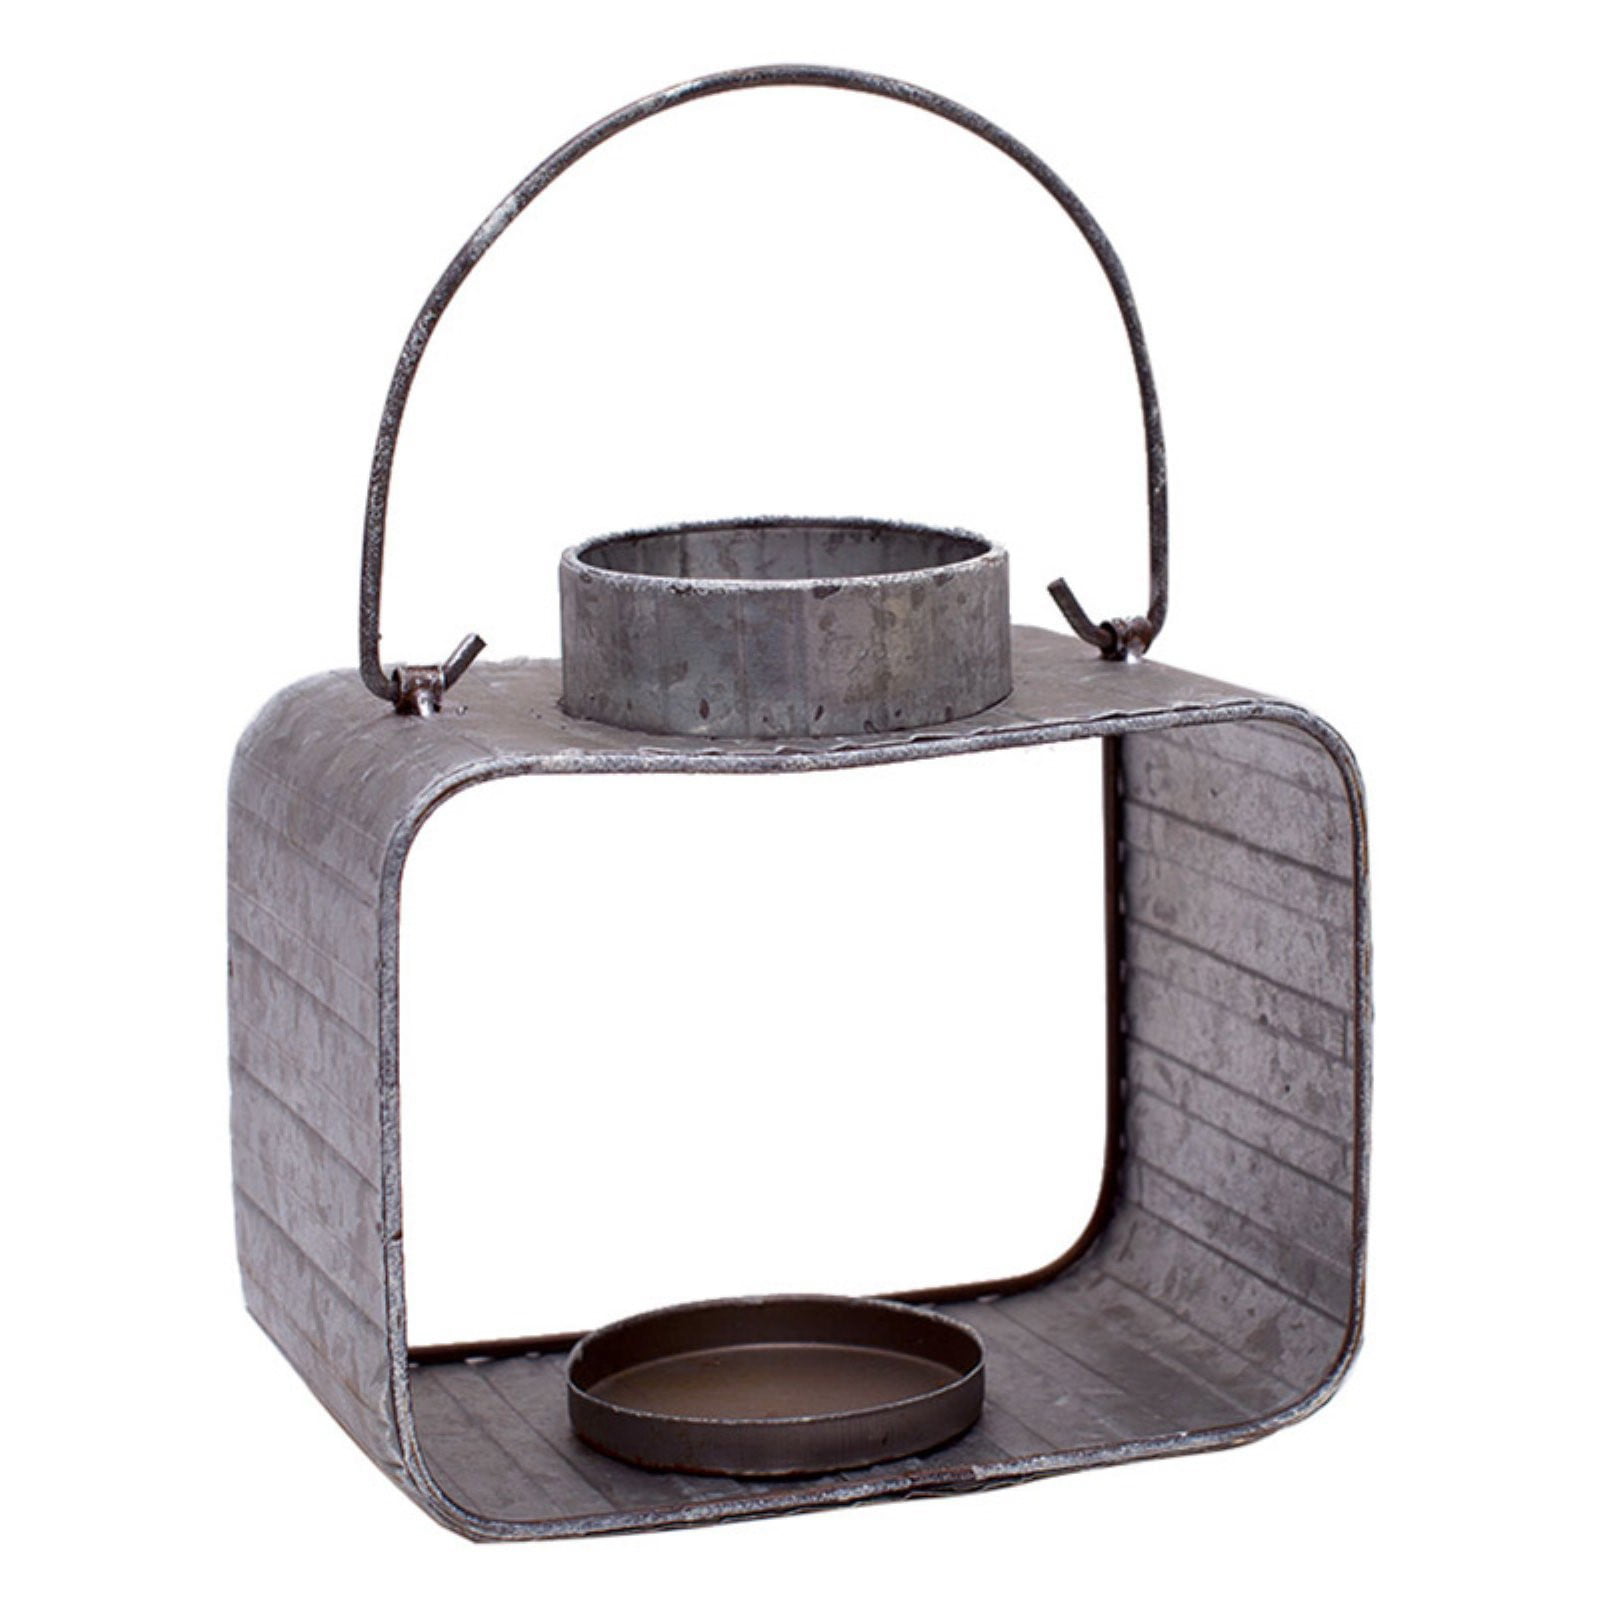 Foreside Home /& Garden Foreside Large Galvanized Candle Lantern